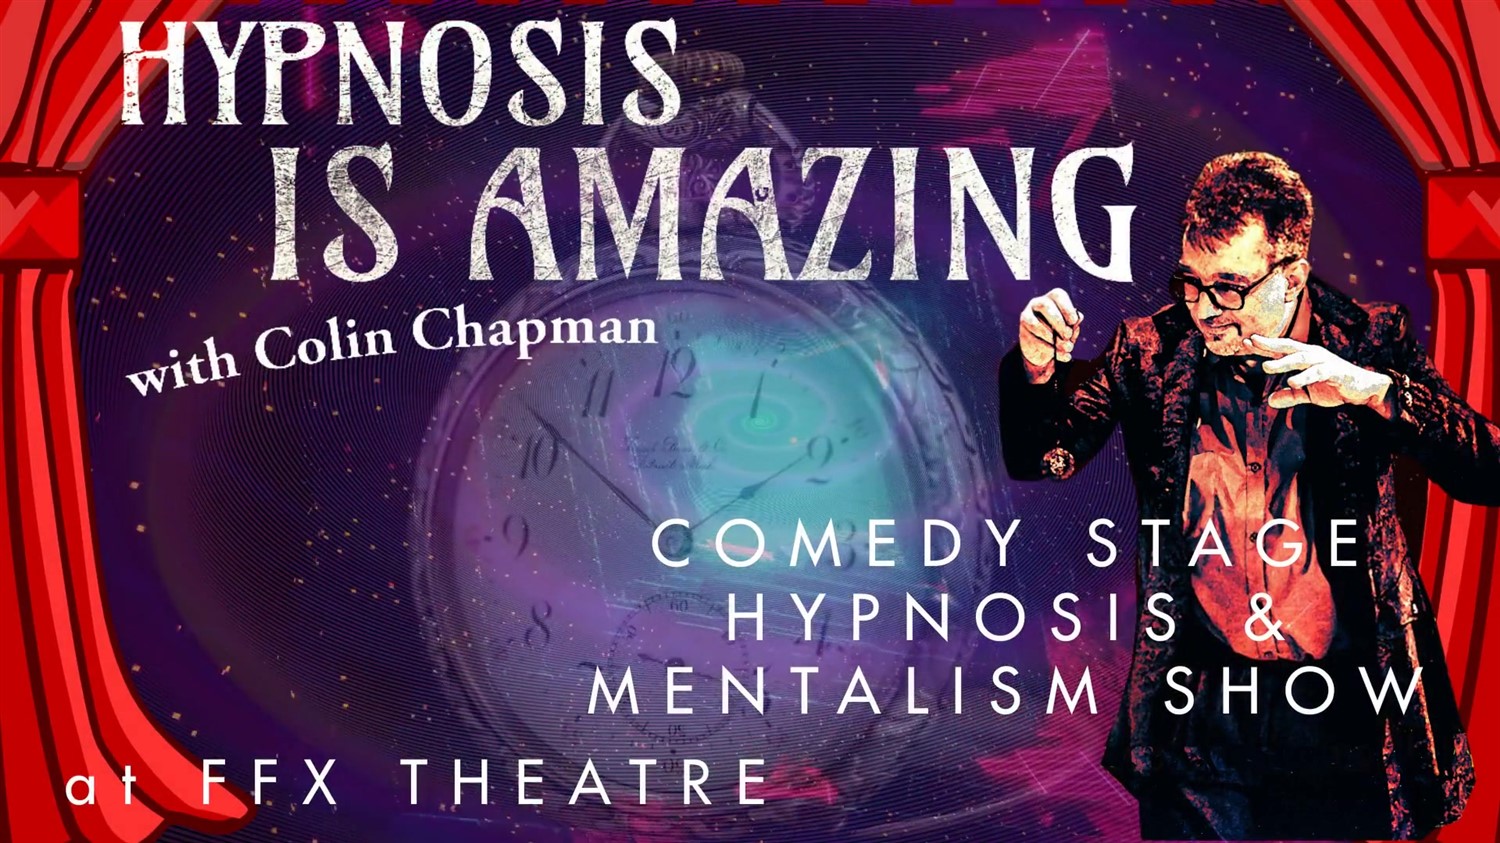 Hypnosis is Amazing Comedy Stage Hypnosis & Mentalism Show on feb. 19, 20:00@FFX Theatre - Buy tickets and Get information on Family Fun Xperience tickets.ffxshow.org